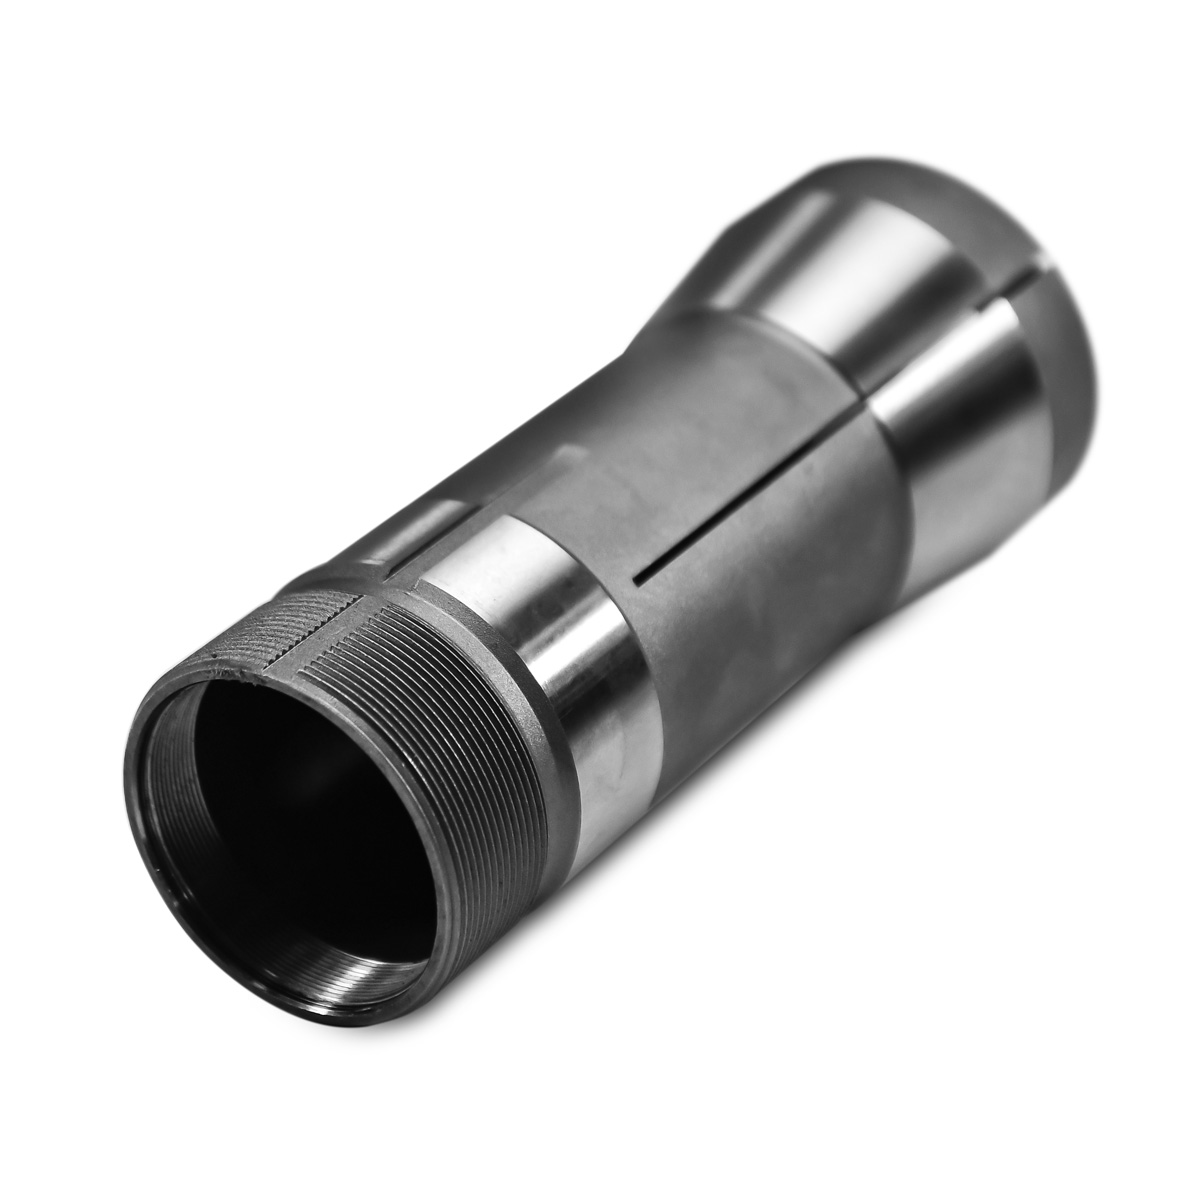 20C 3/4" Extended Nose Emergency Collet, 1/4" pilot hole, 4 slots